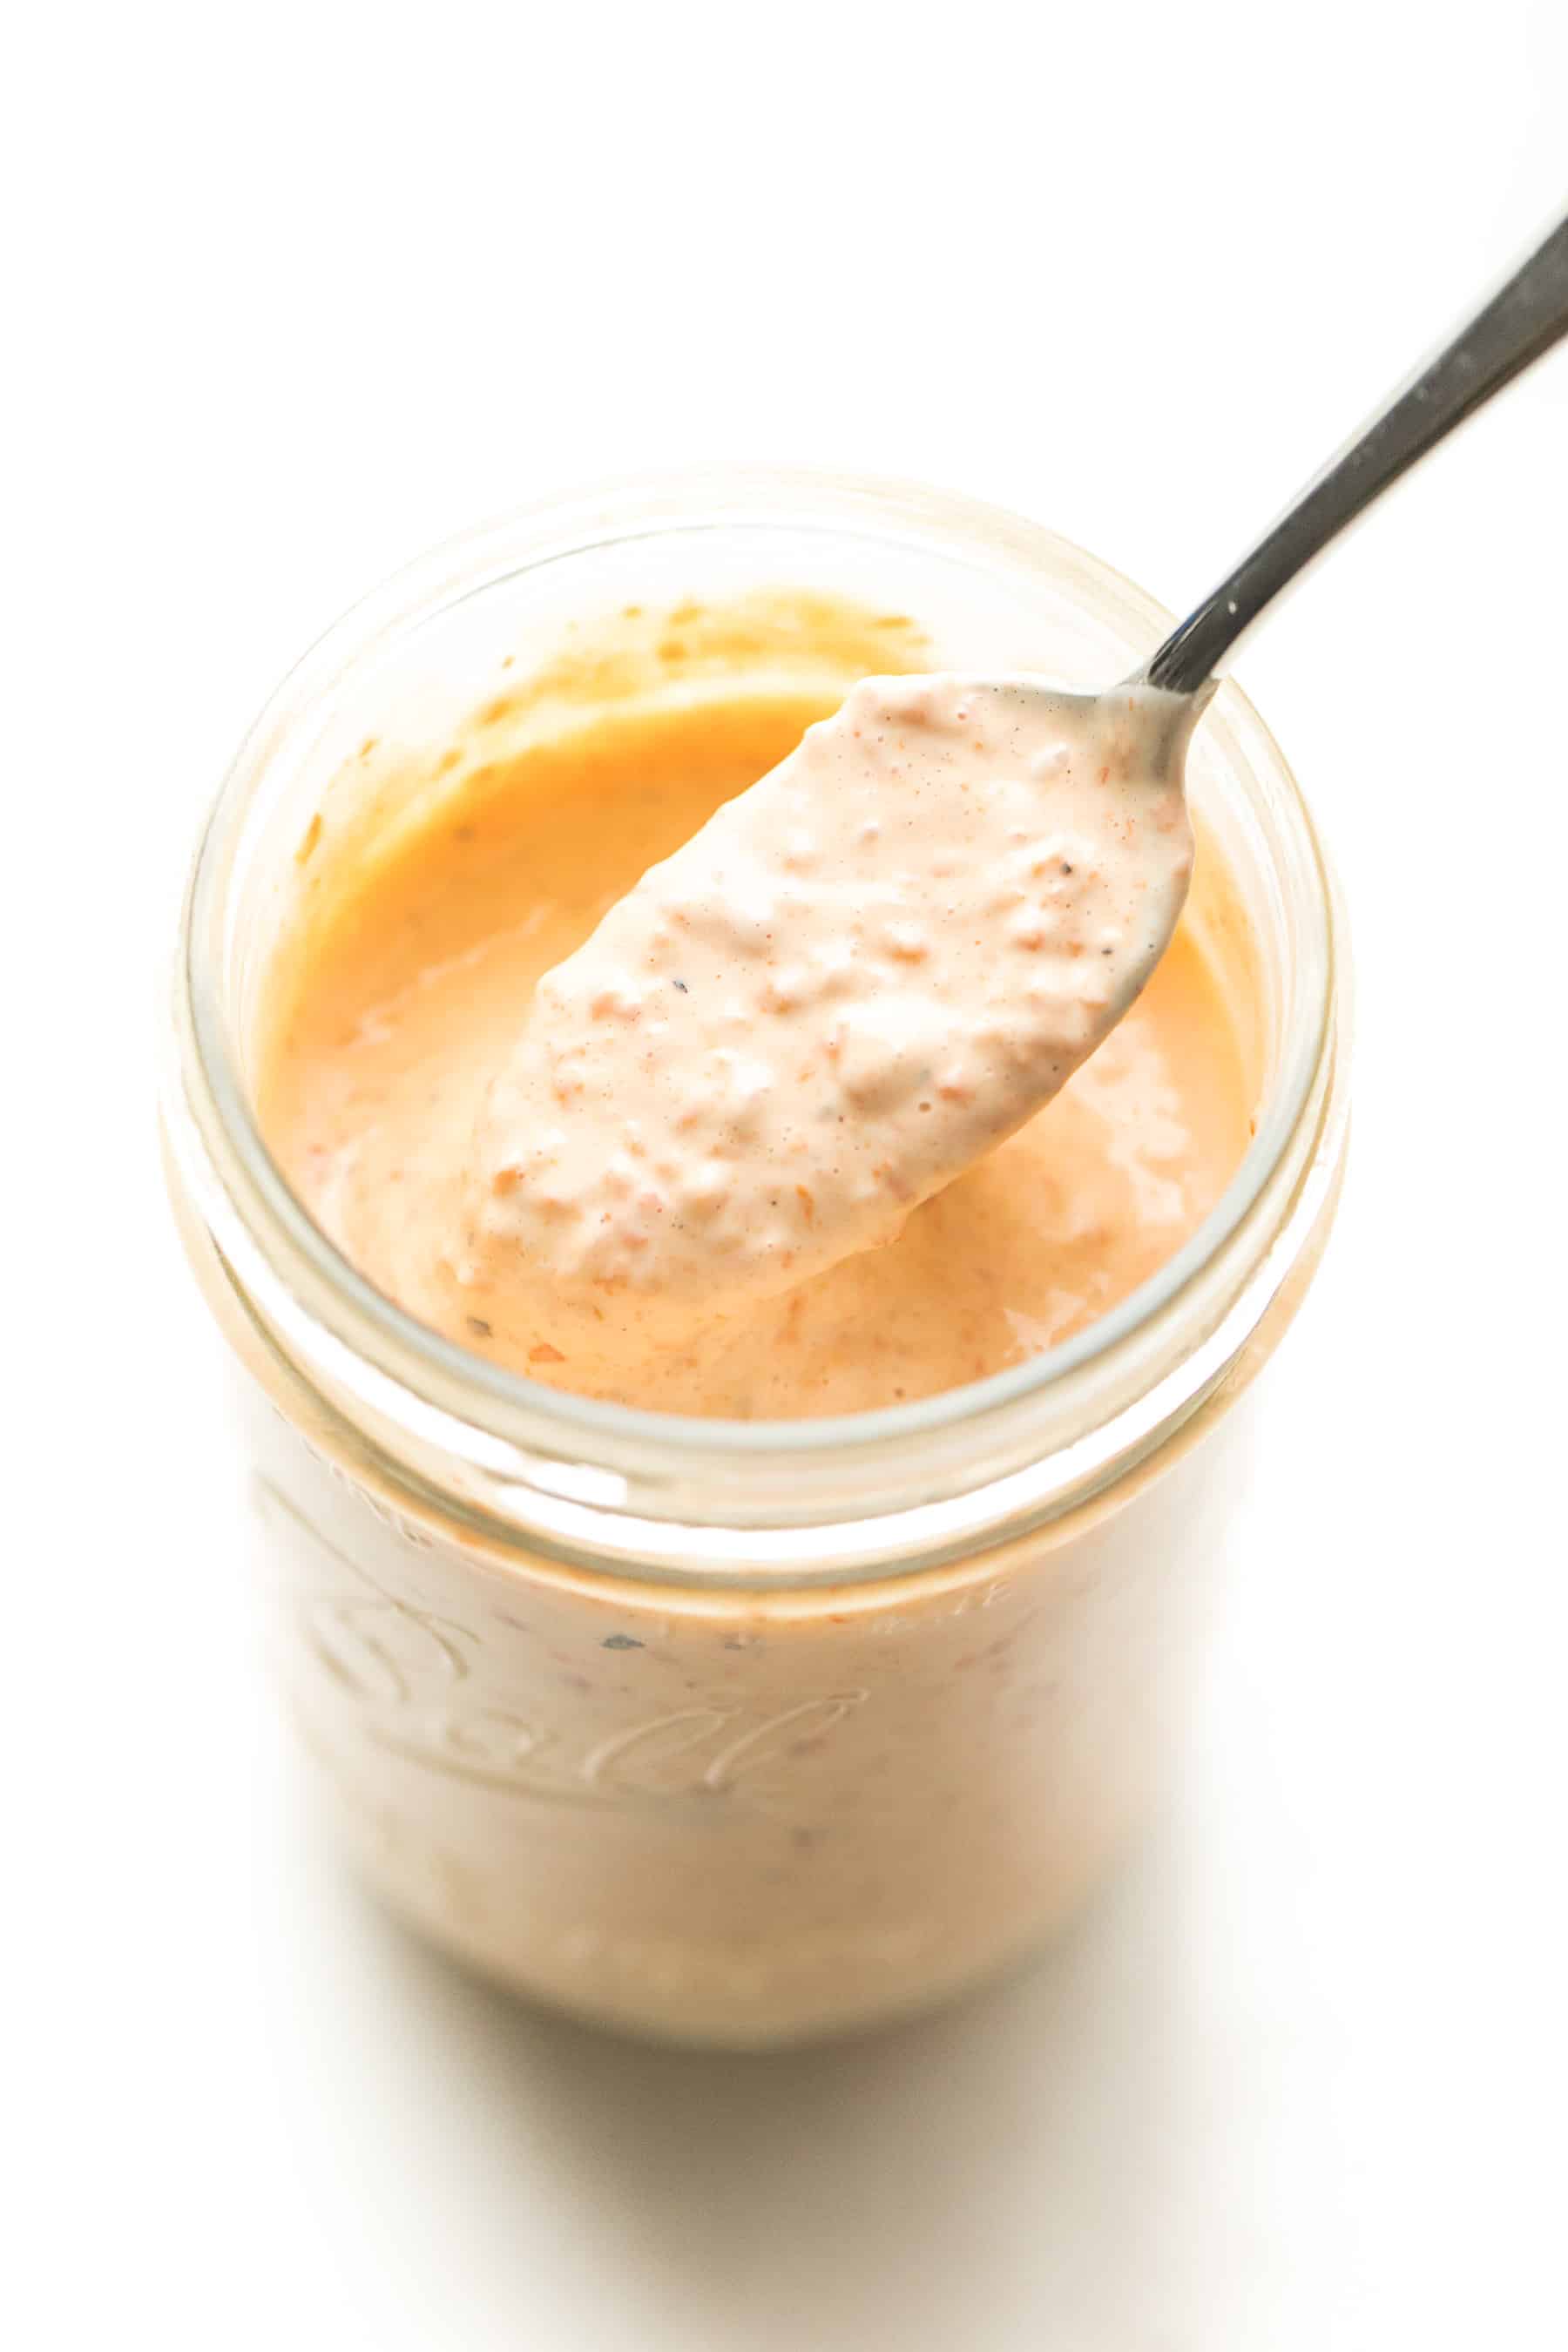 Spoon scooping out red pepper mayonnaise from a mason jar